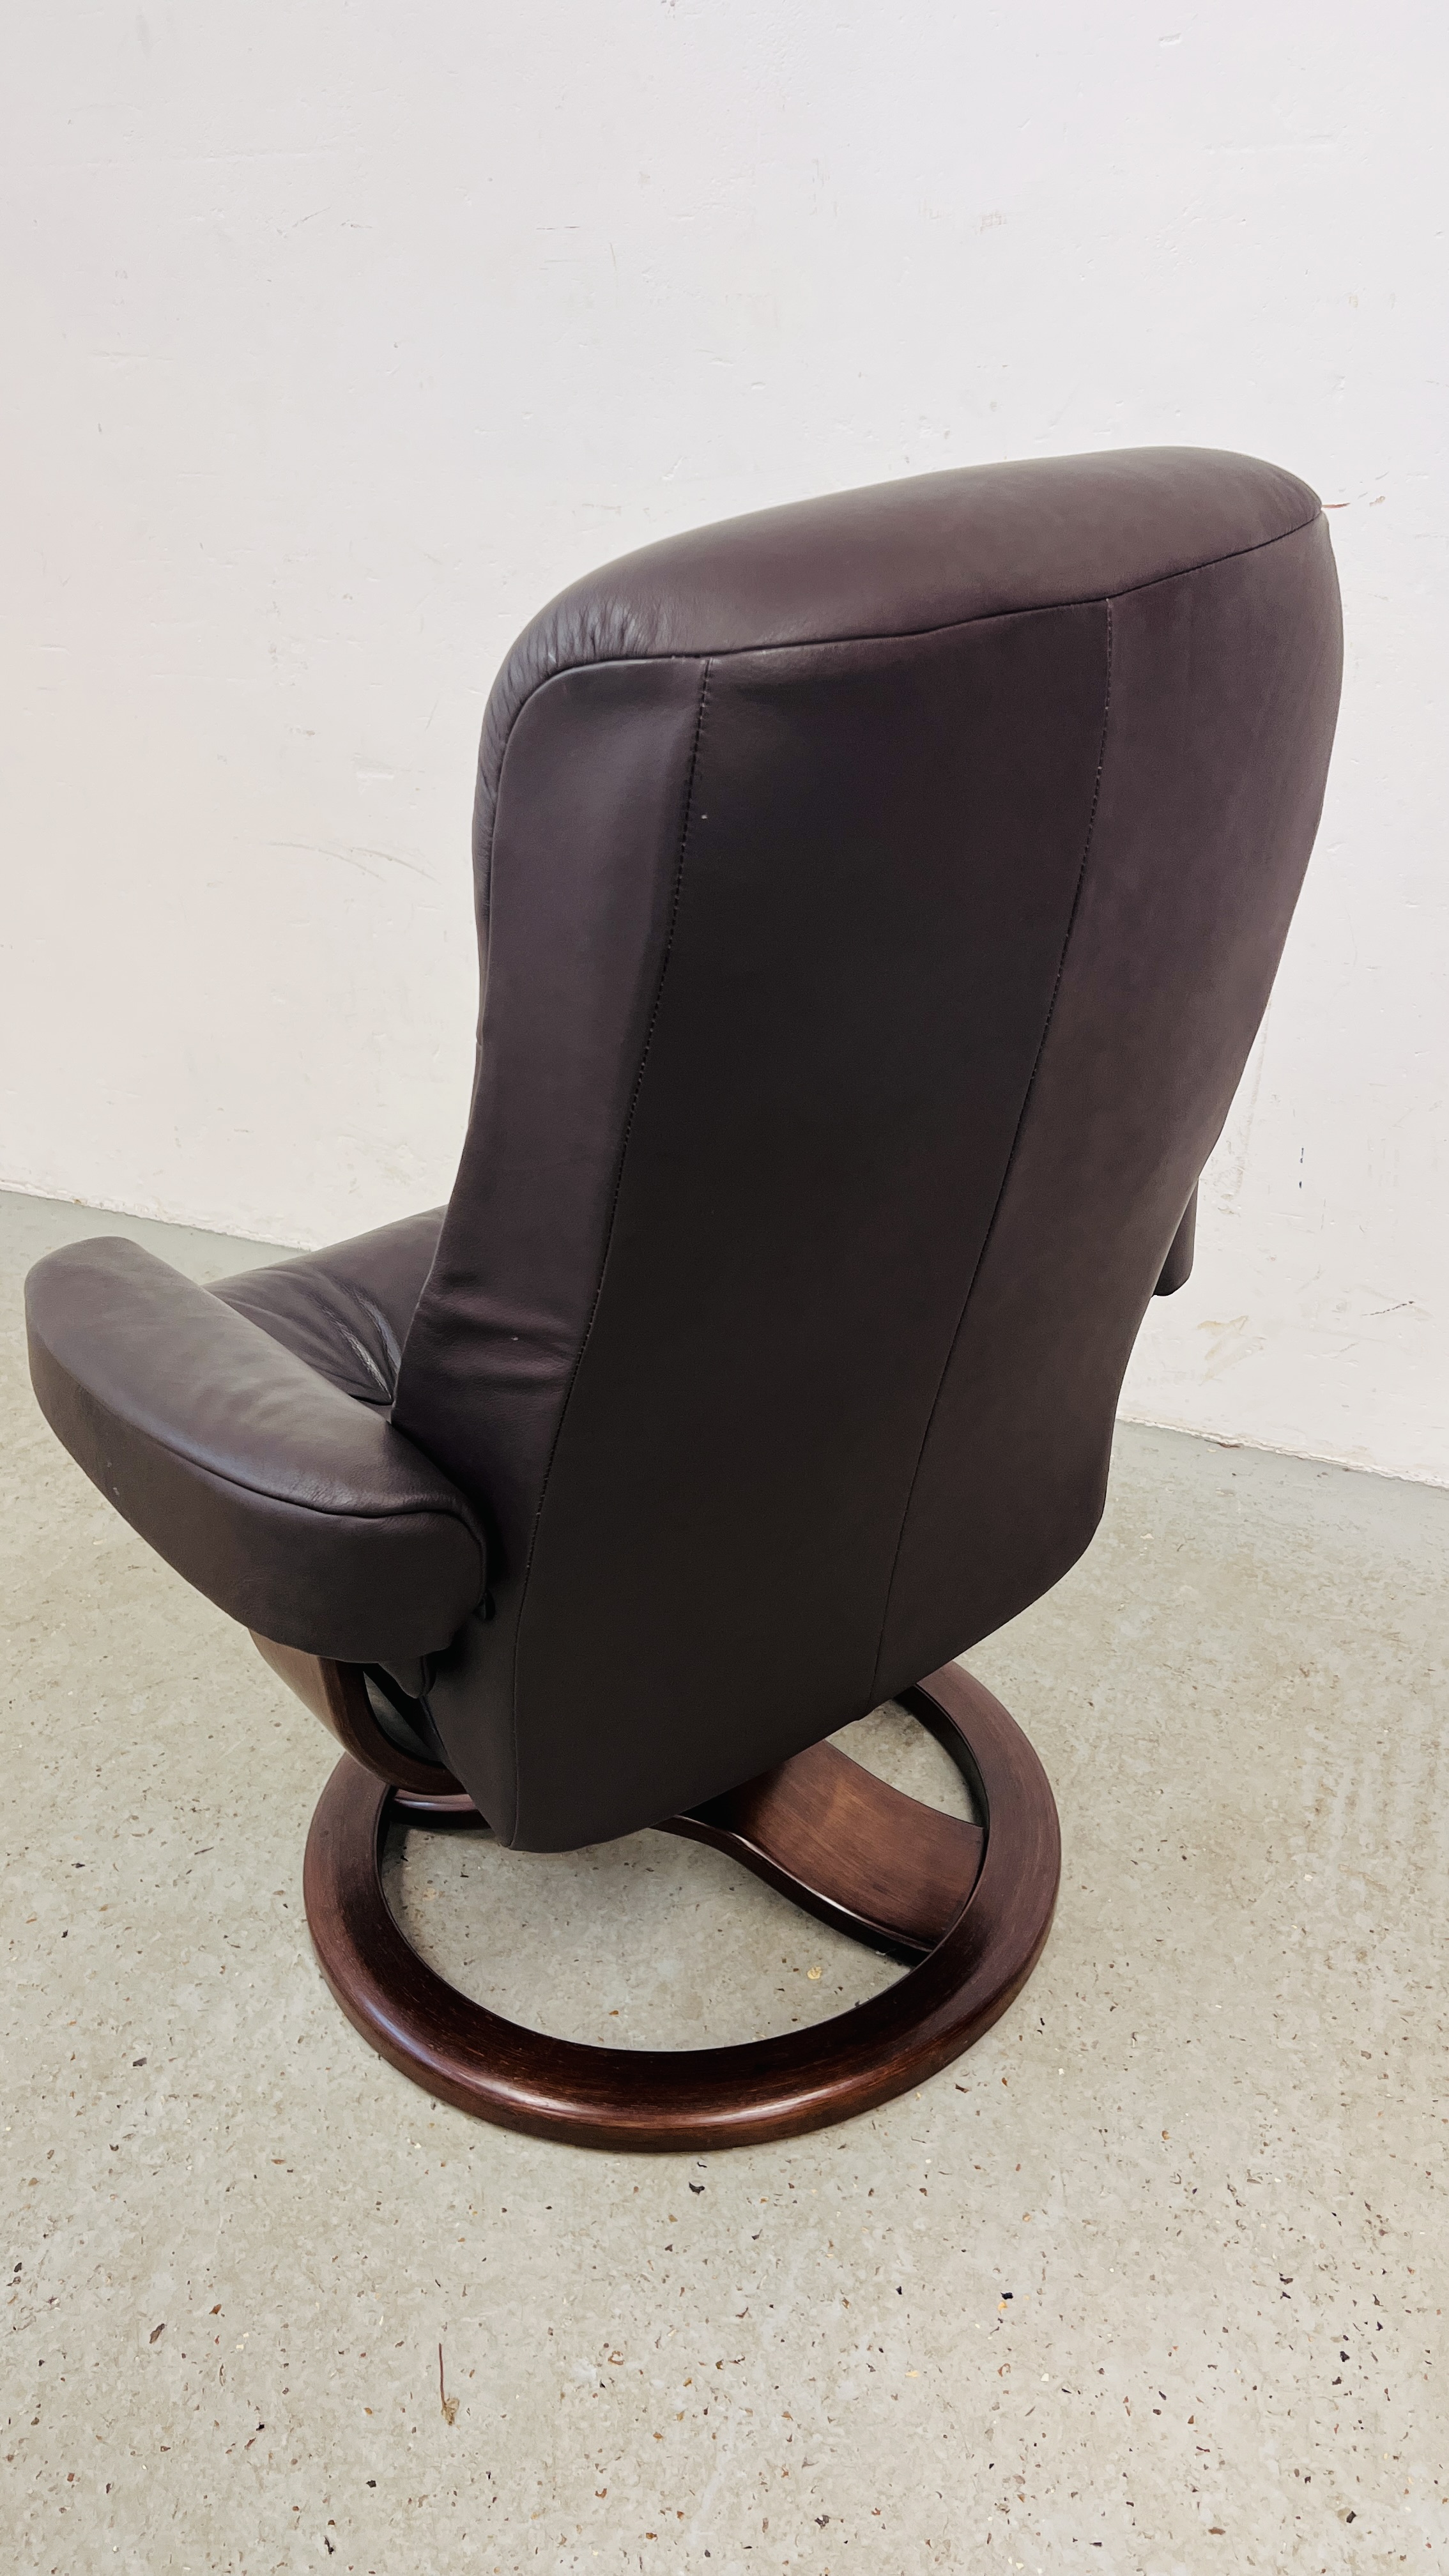 A BROWN LEATHER RELAXER CHAIR - Image 9 of 9